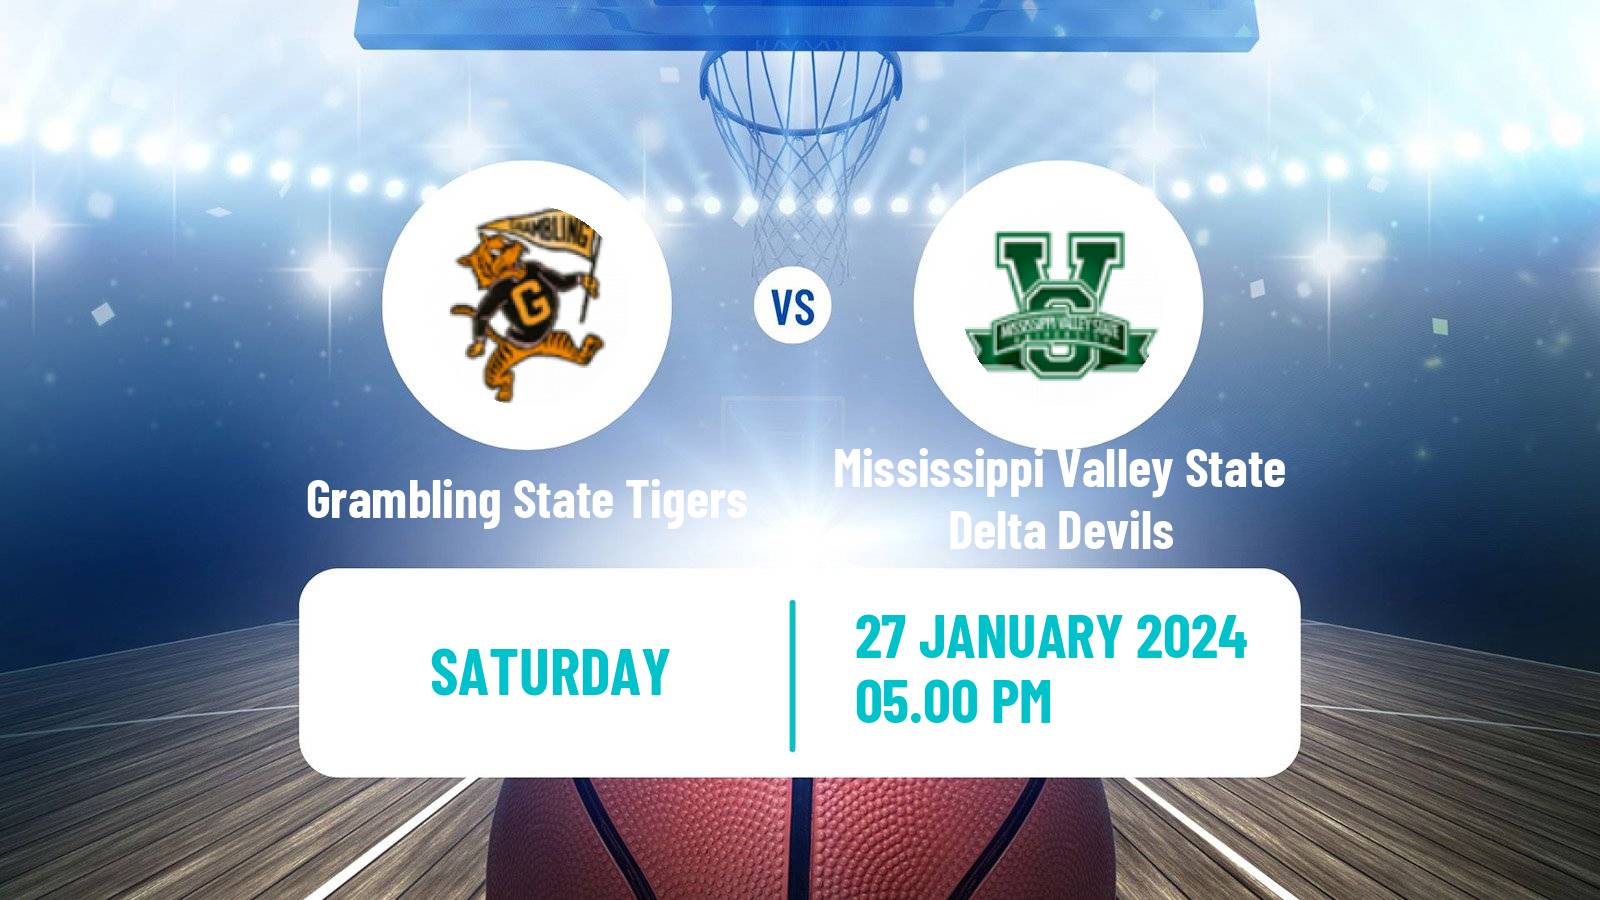 Basketball NCAA College Basketball Grambling State Tigers - Mississippi Valley State Delta Devils